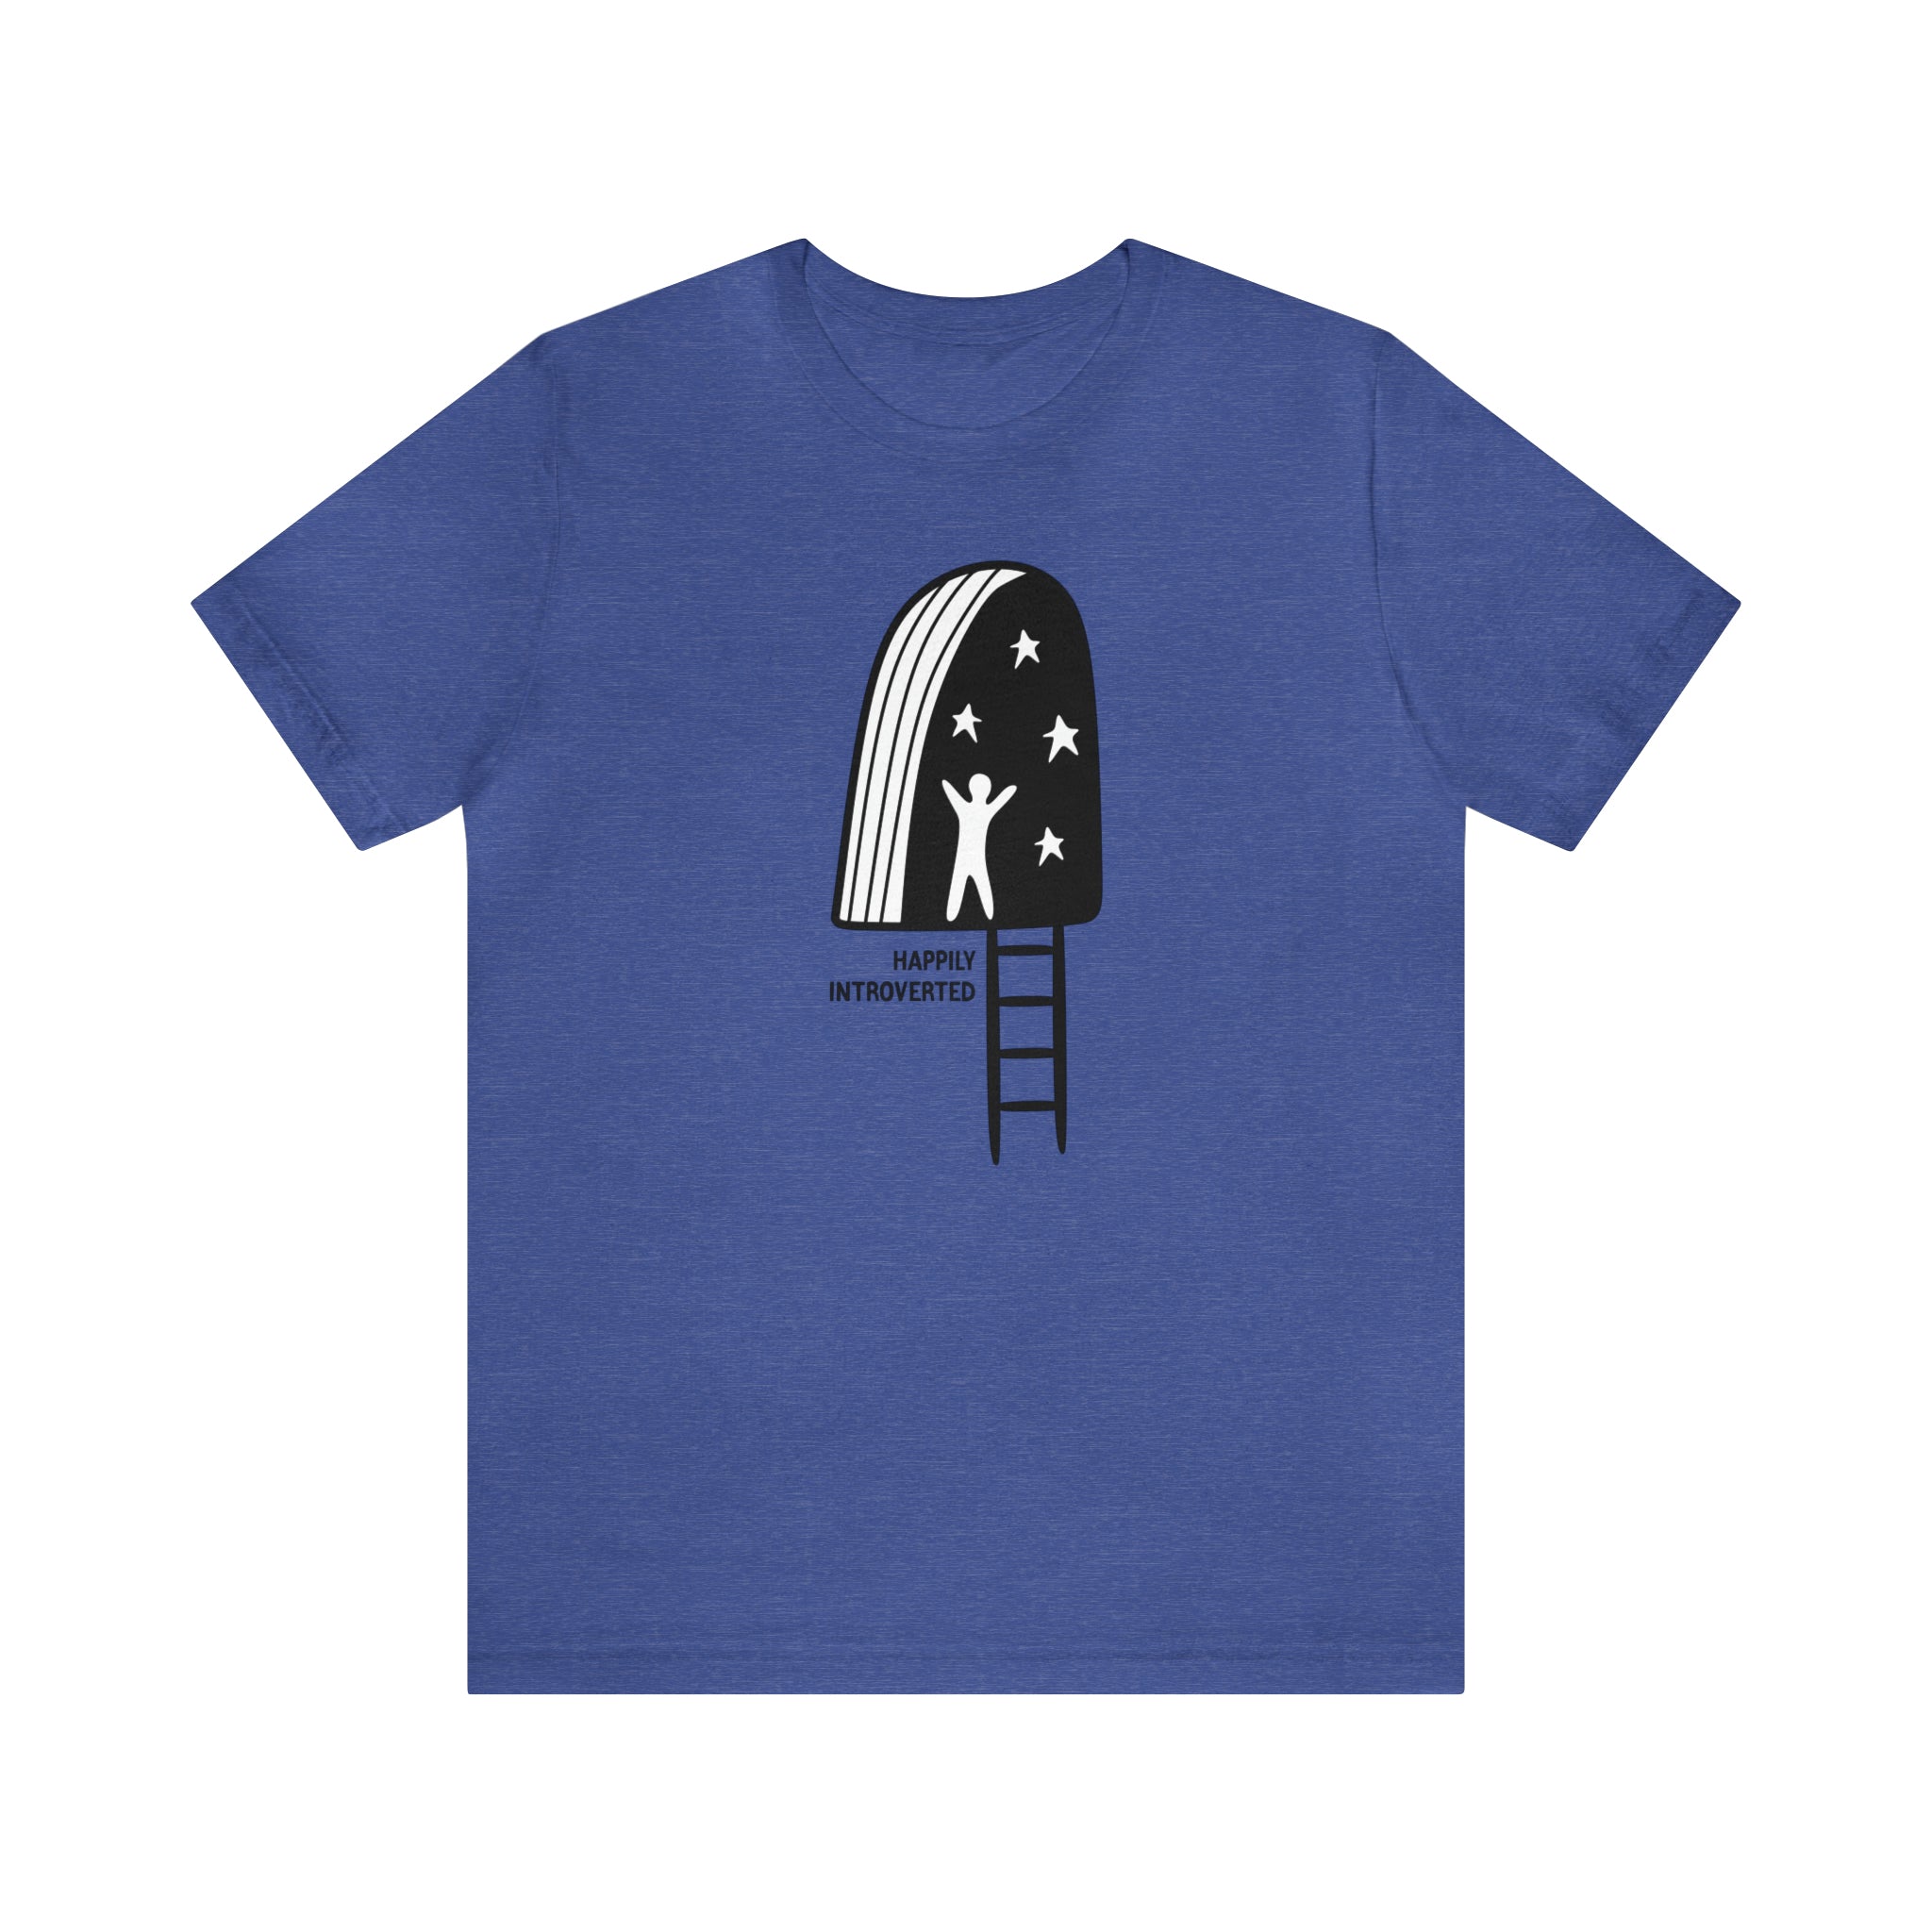 A Happily Introverted T-Shirt with a picture of a man on it.